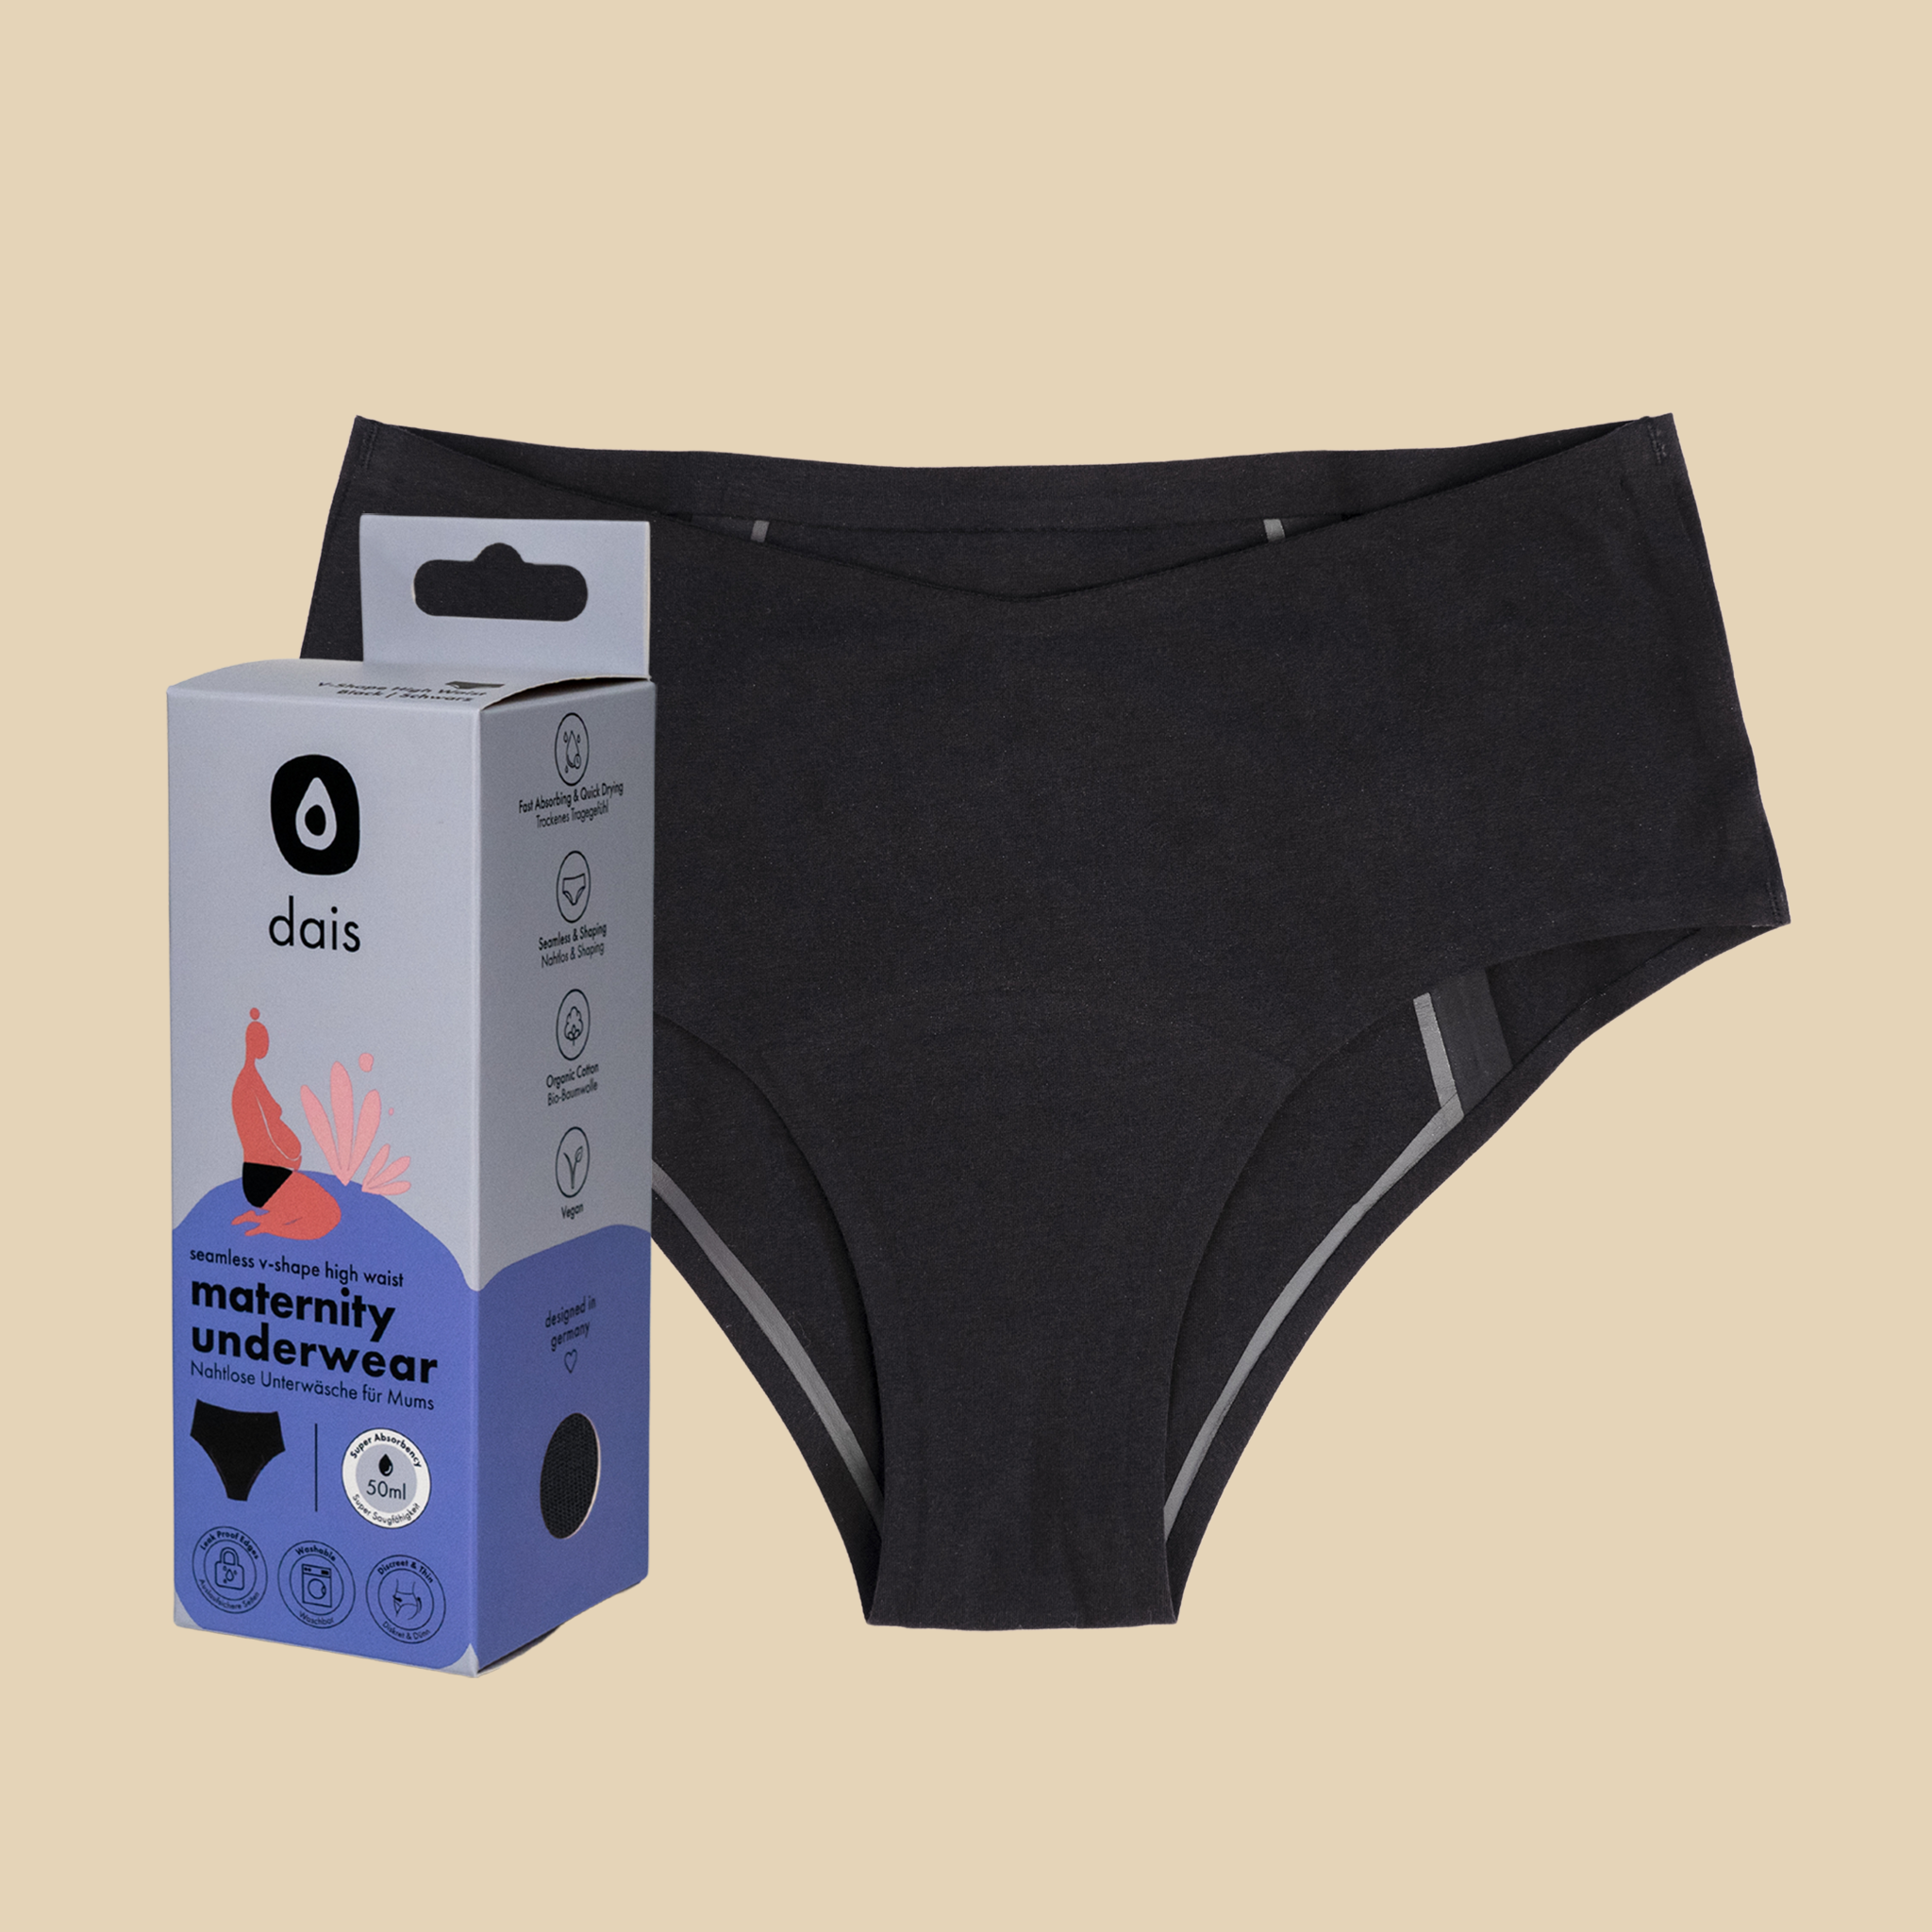 dais absorbent maternity underwear with high waist cut in black colour shown with modern packaging